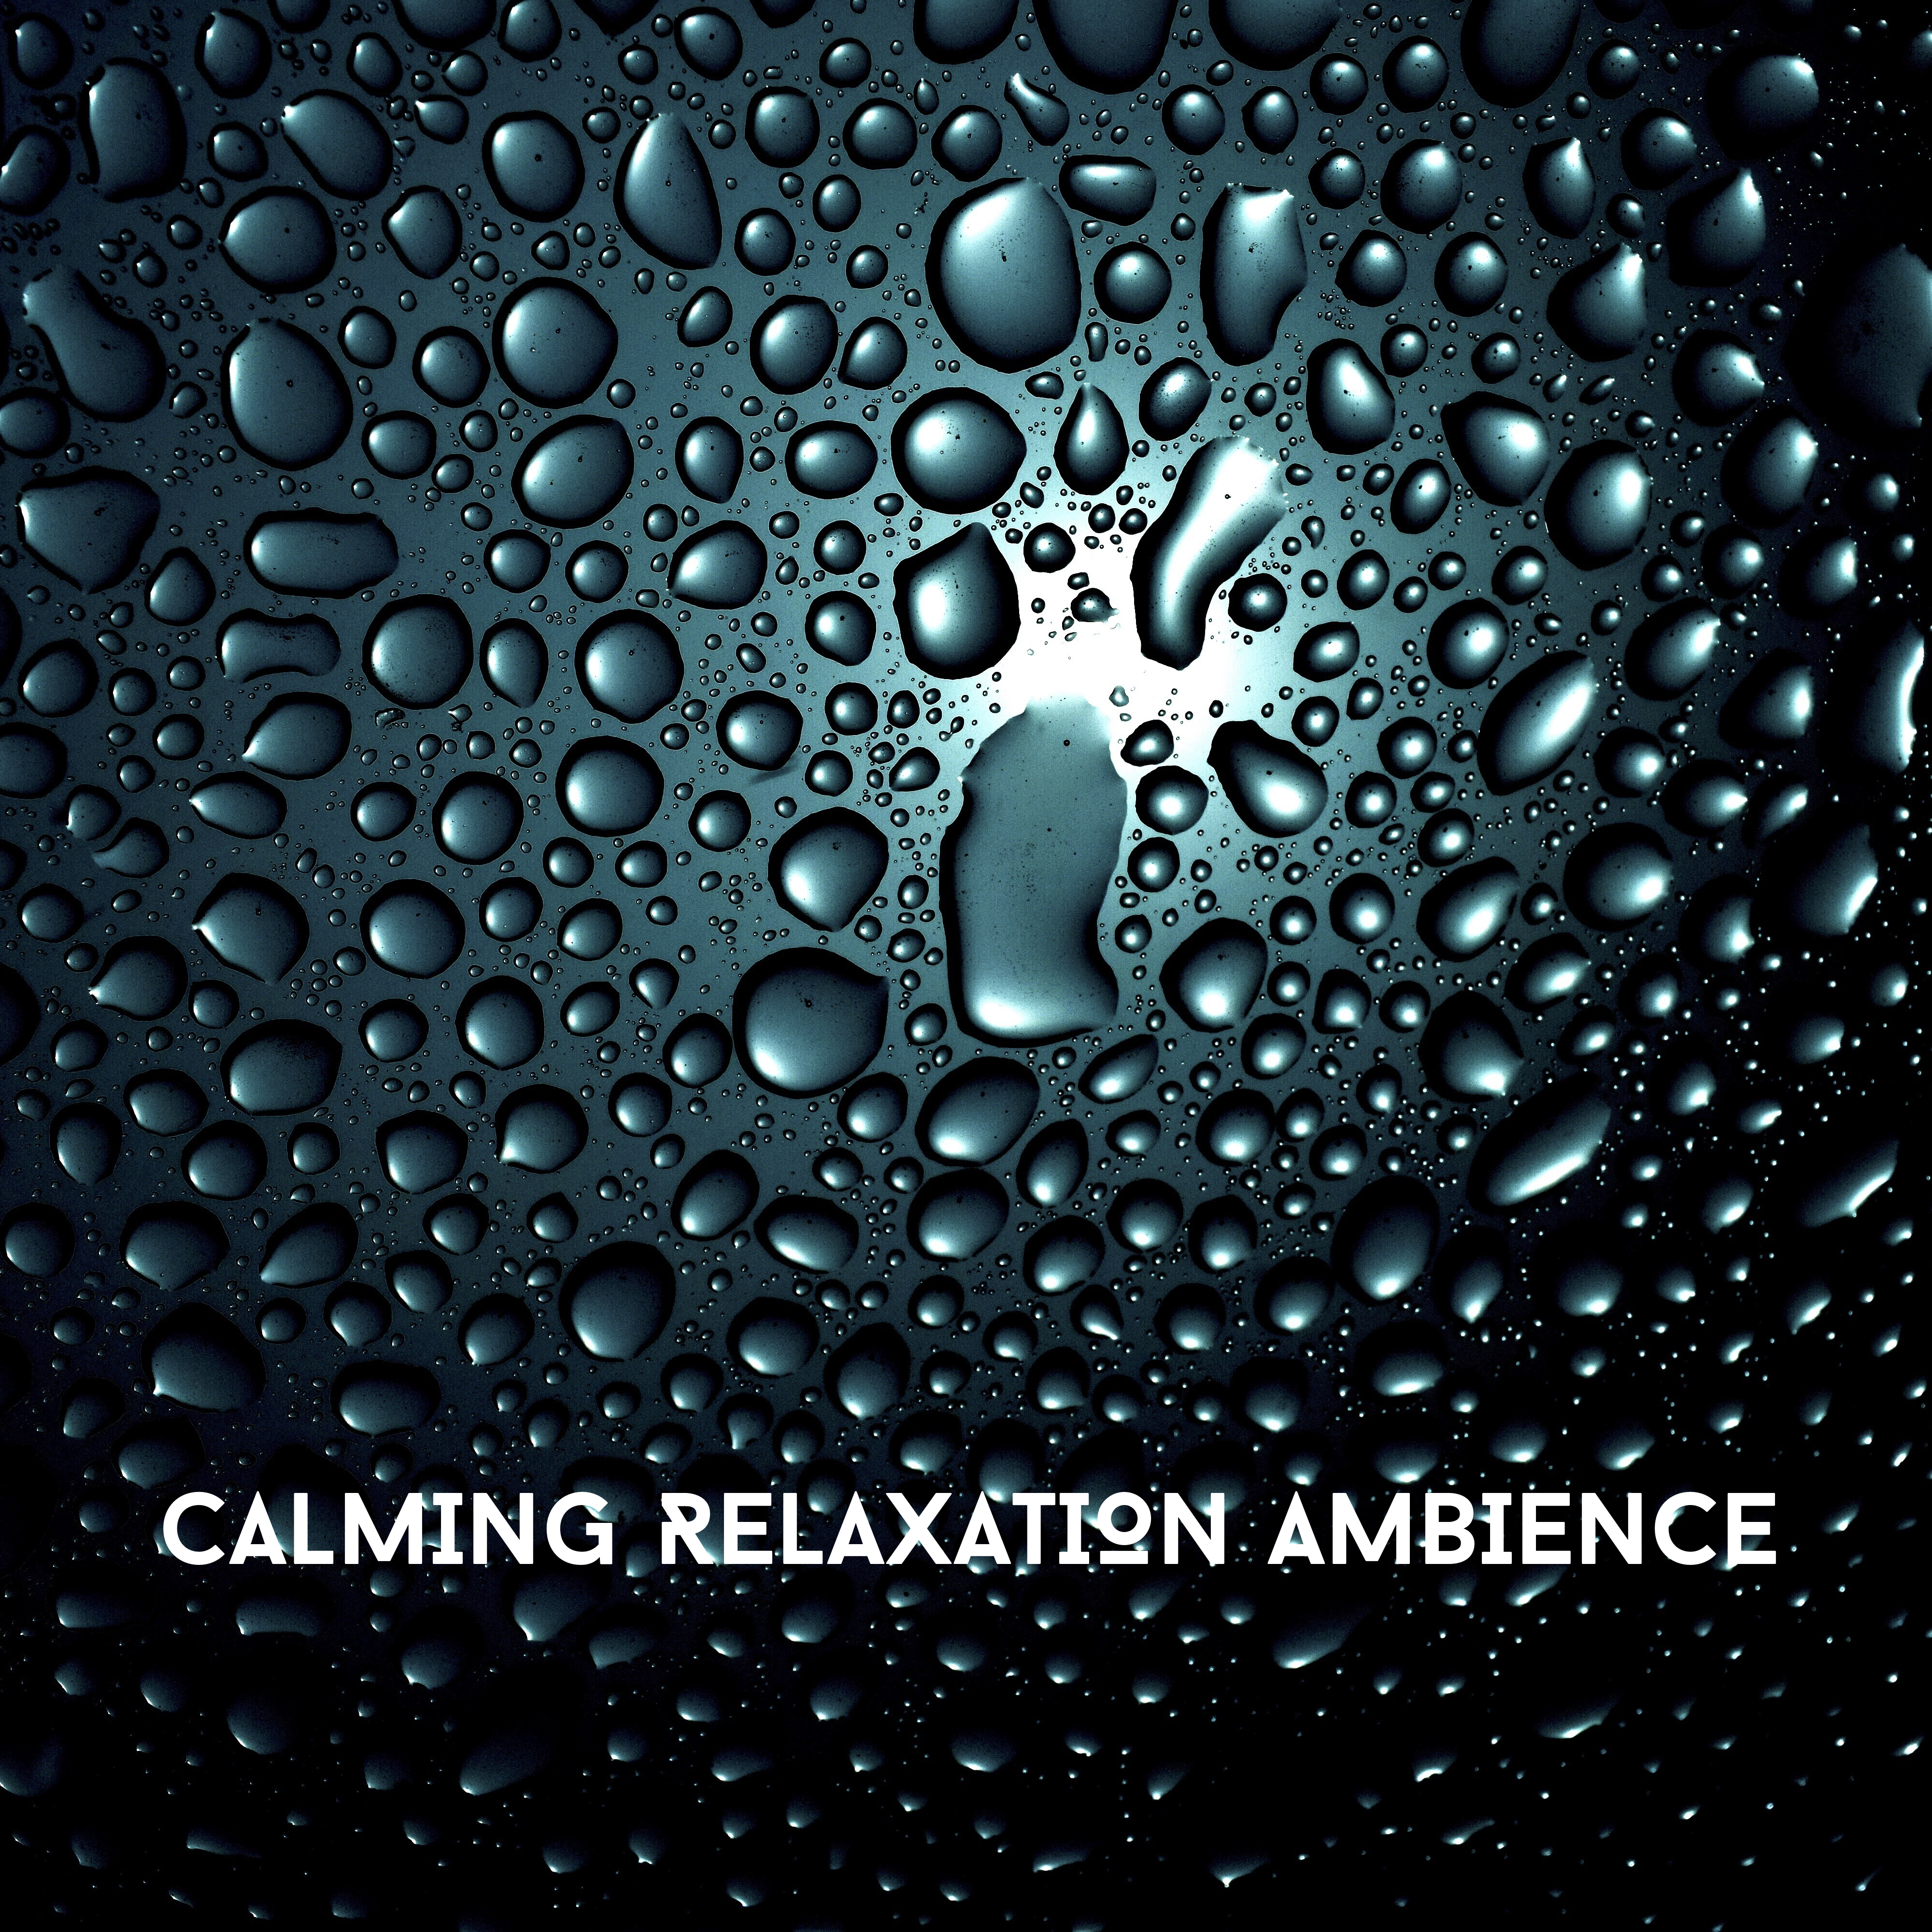 Calming Relaxation Ambience